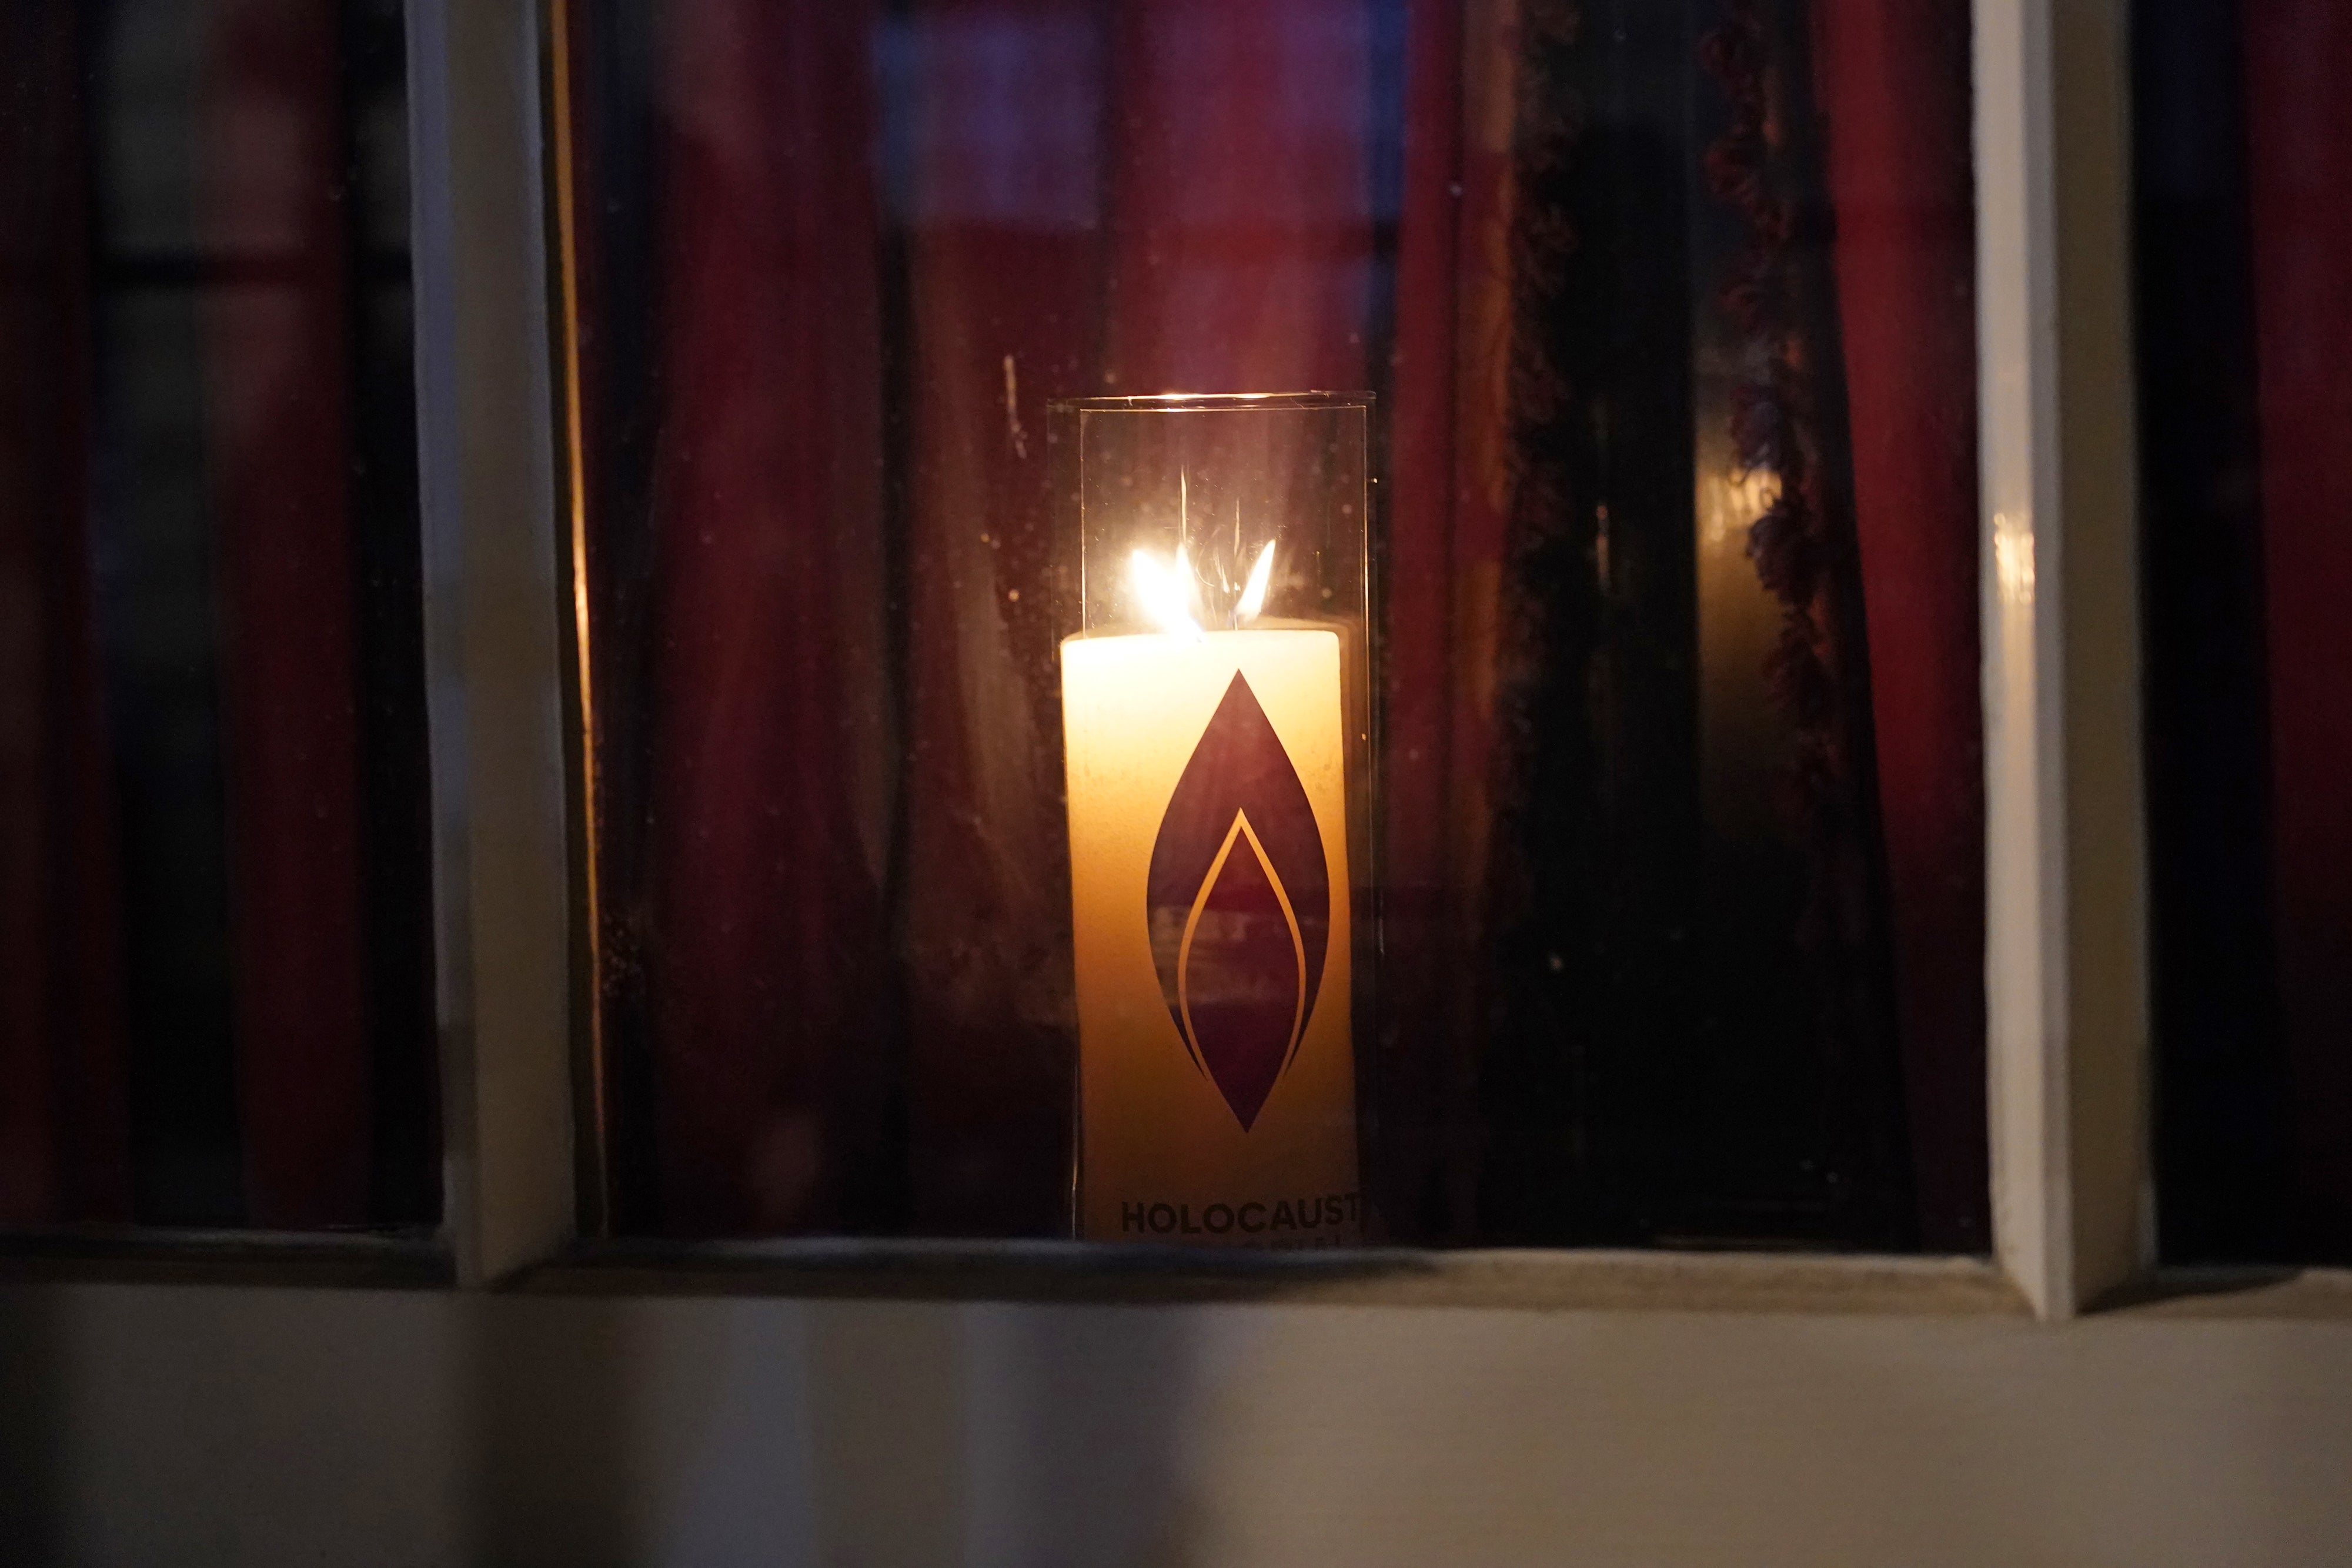 A candle in the window of 10 Downing Street, London, to mark Holocaust Memorial Day last month (Ian West/PA)